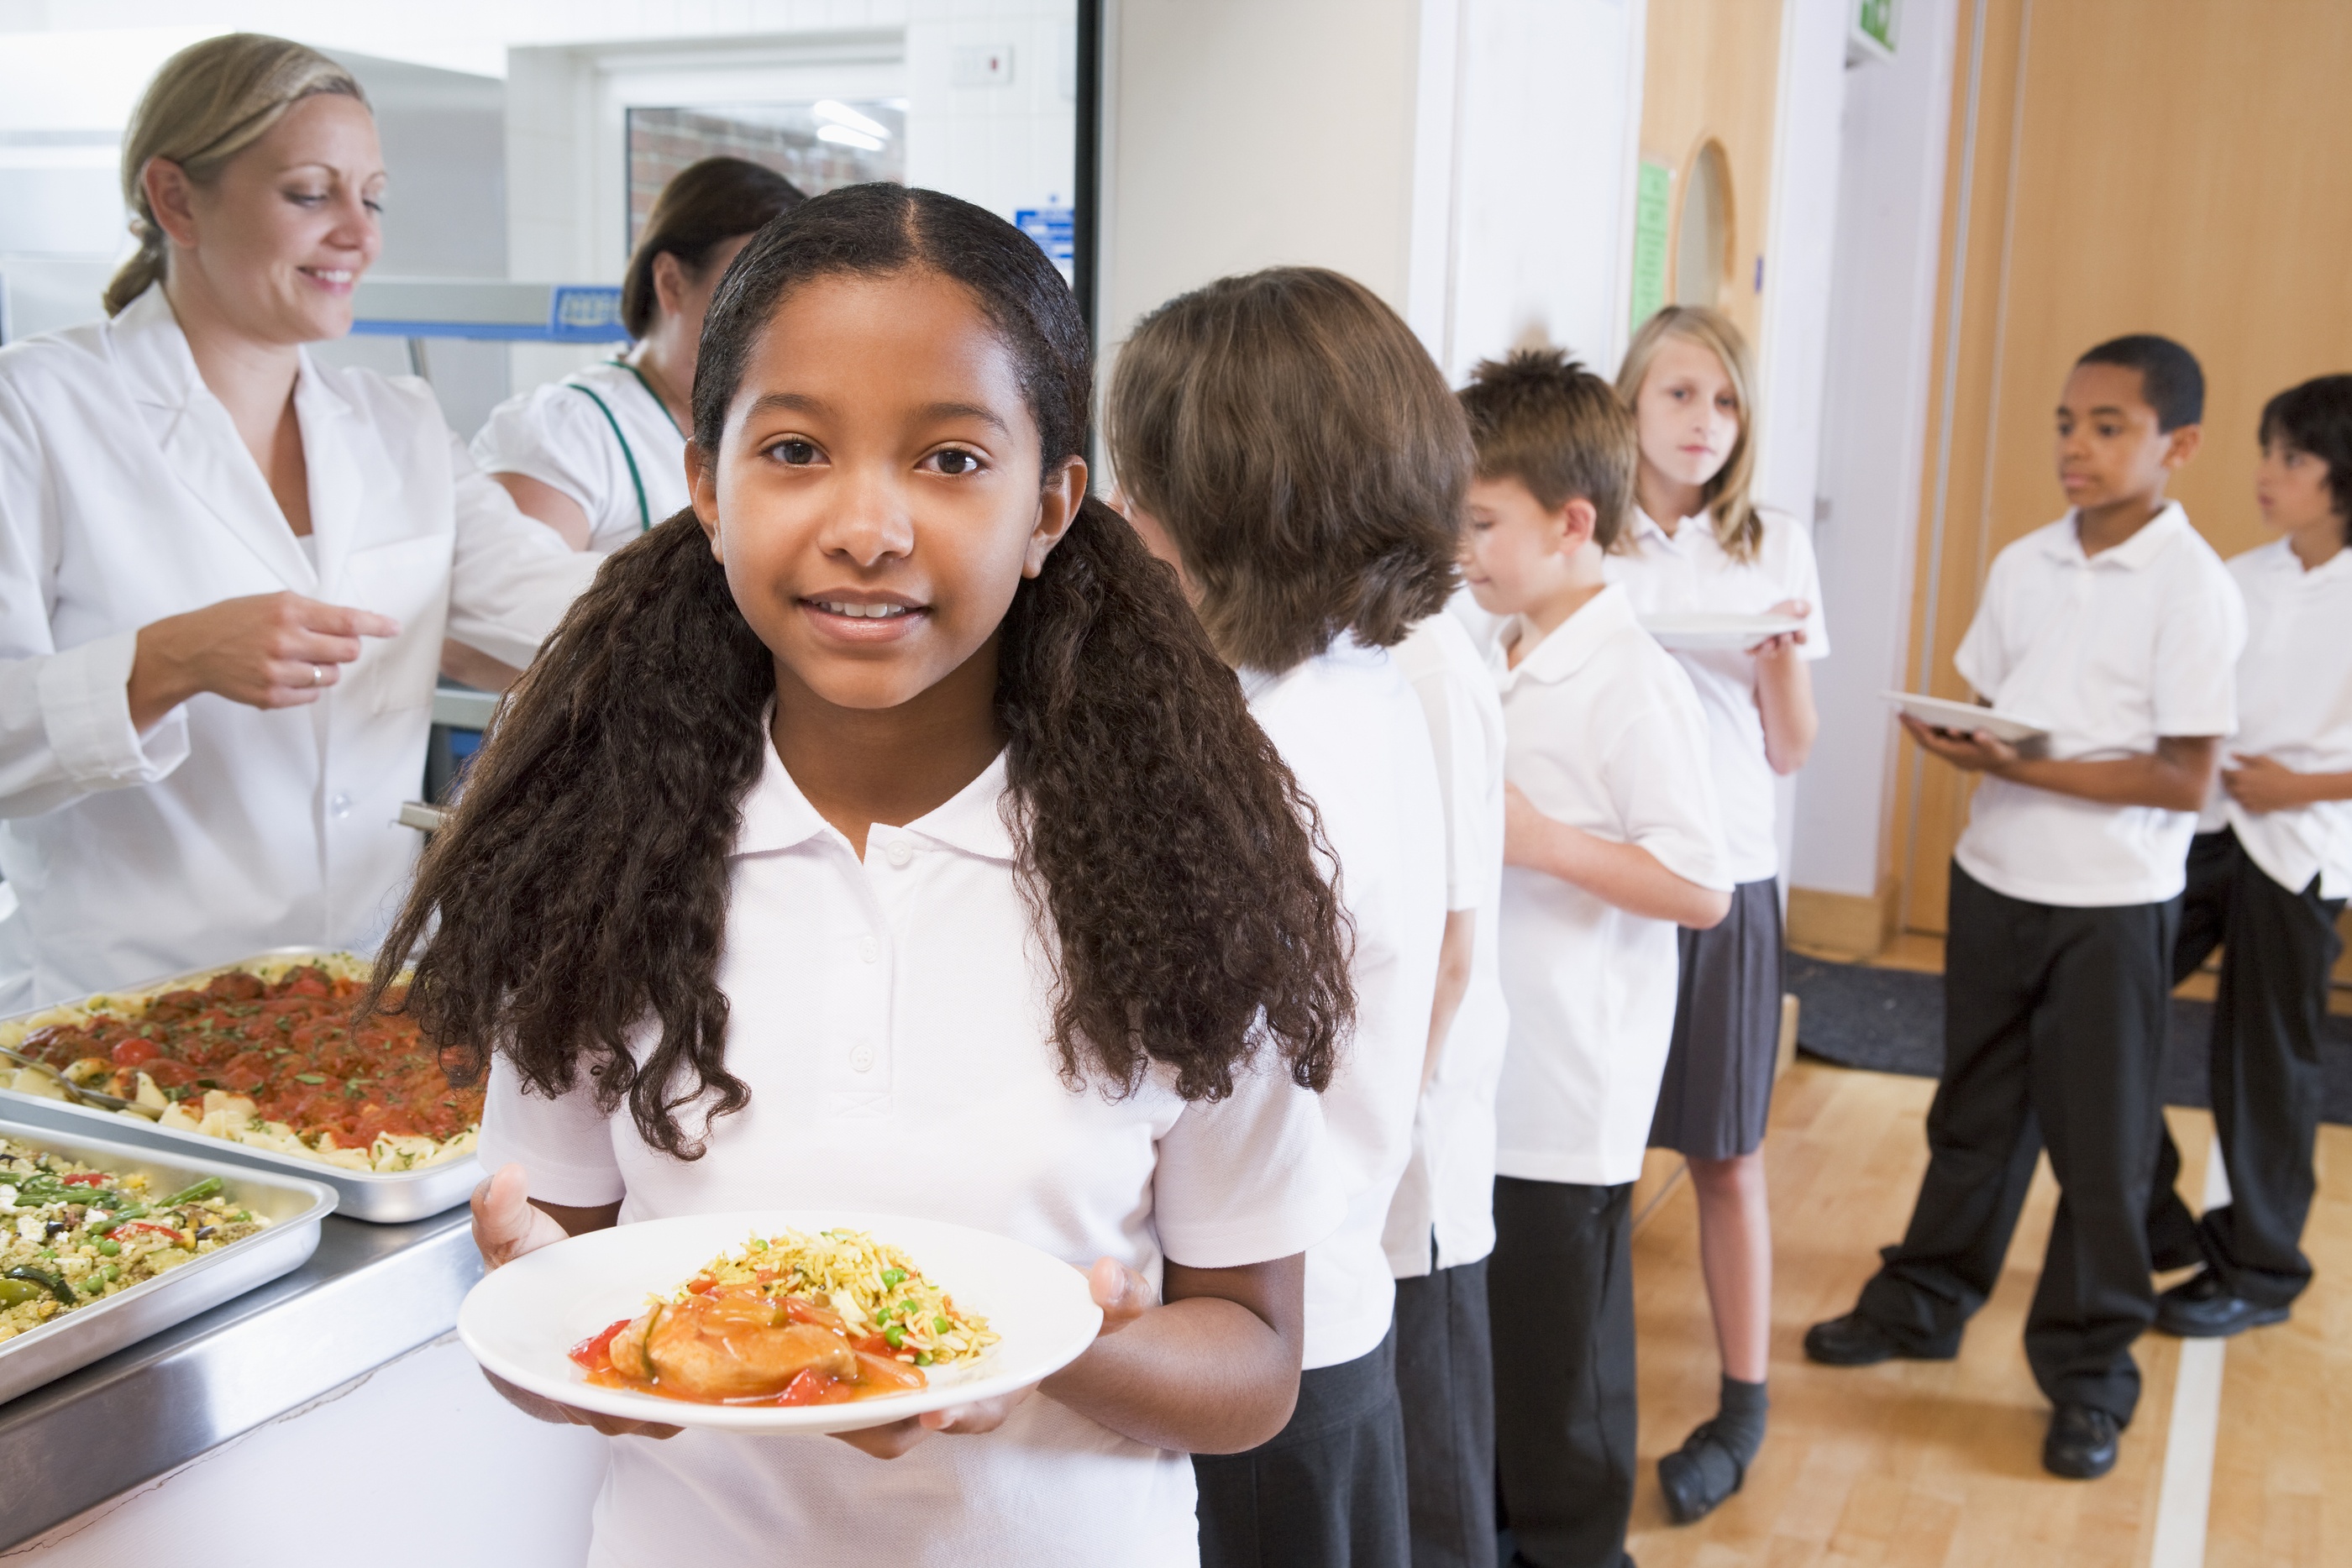 The science behind our nutrition: Should school-funded meals be a priority?